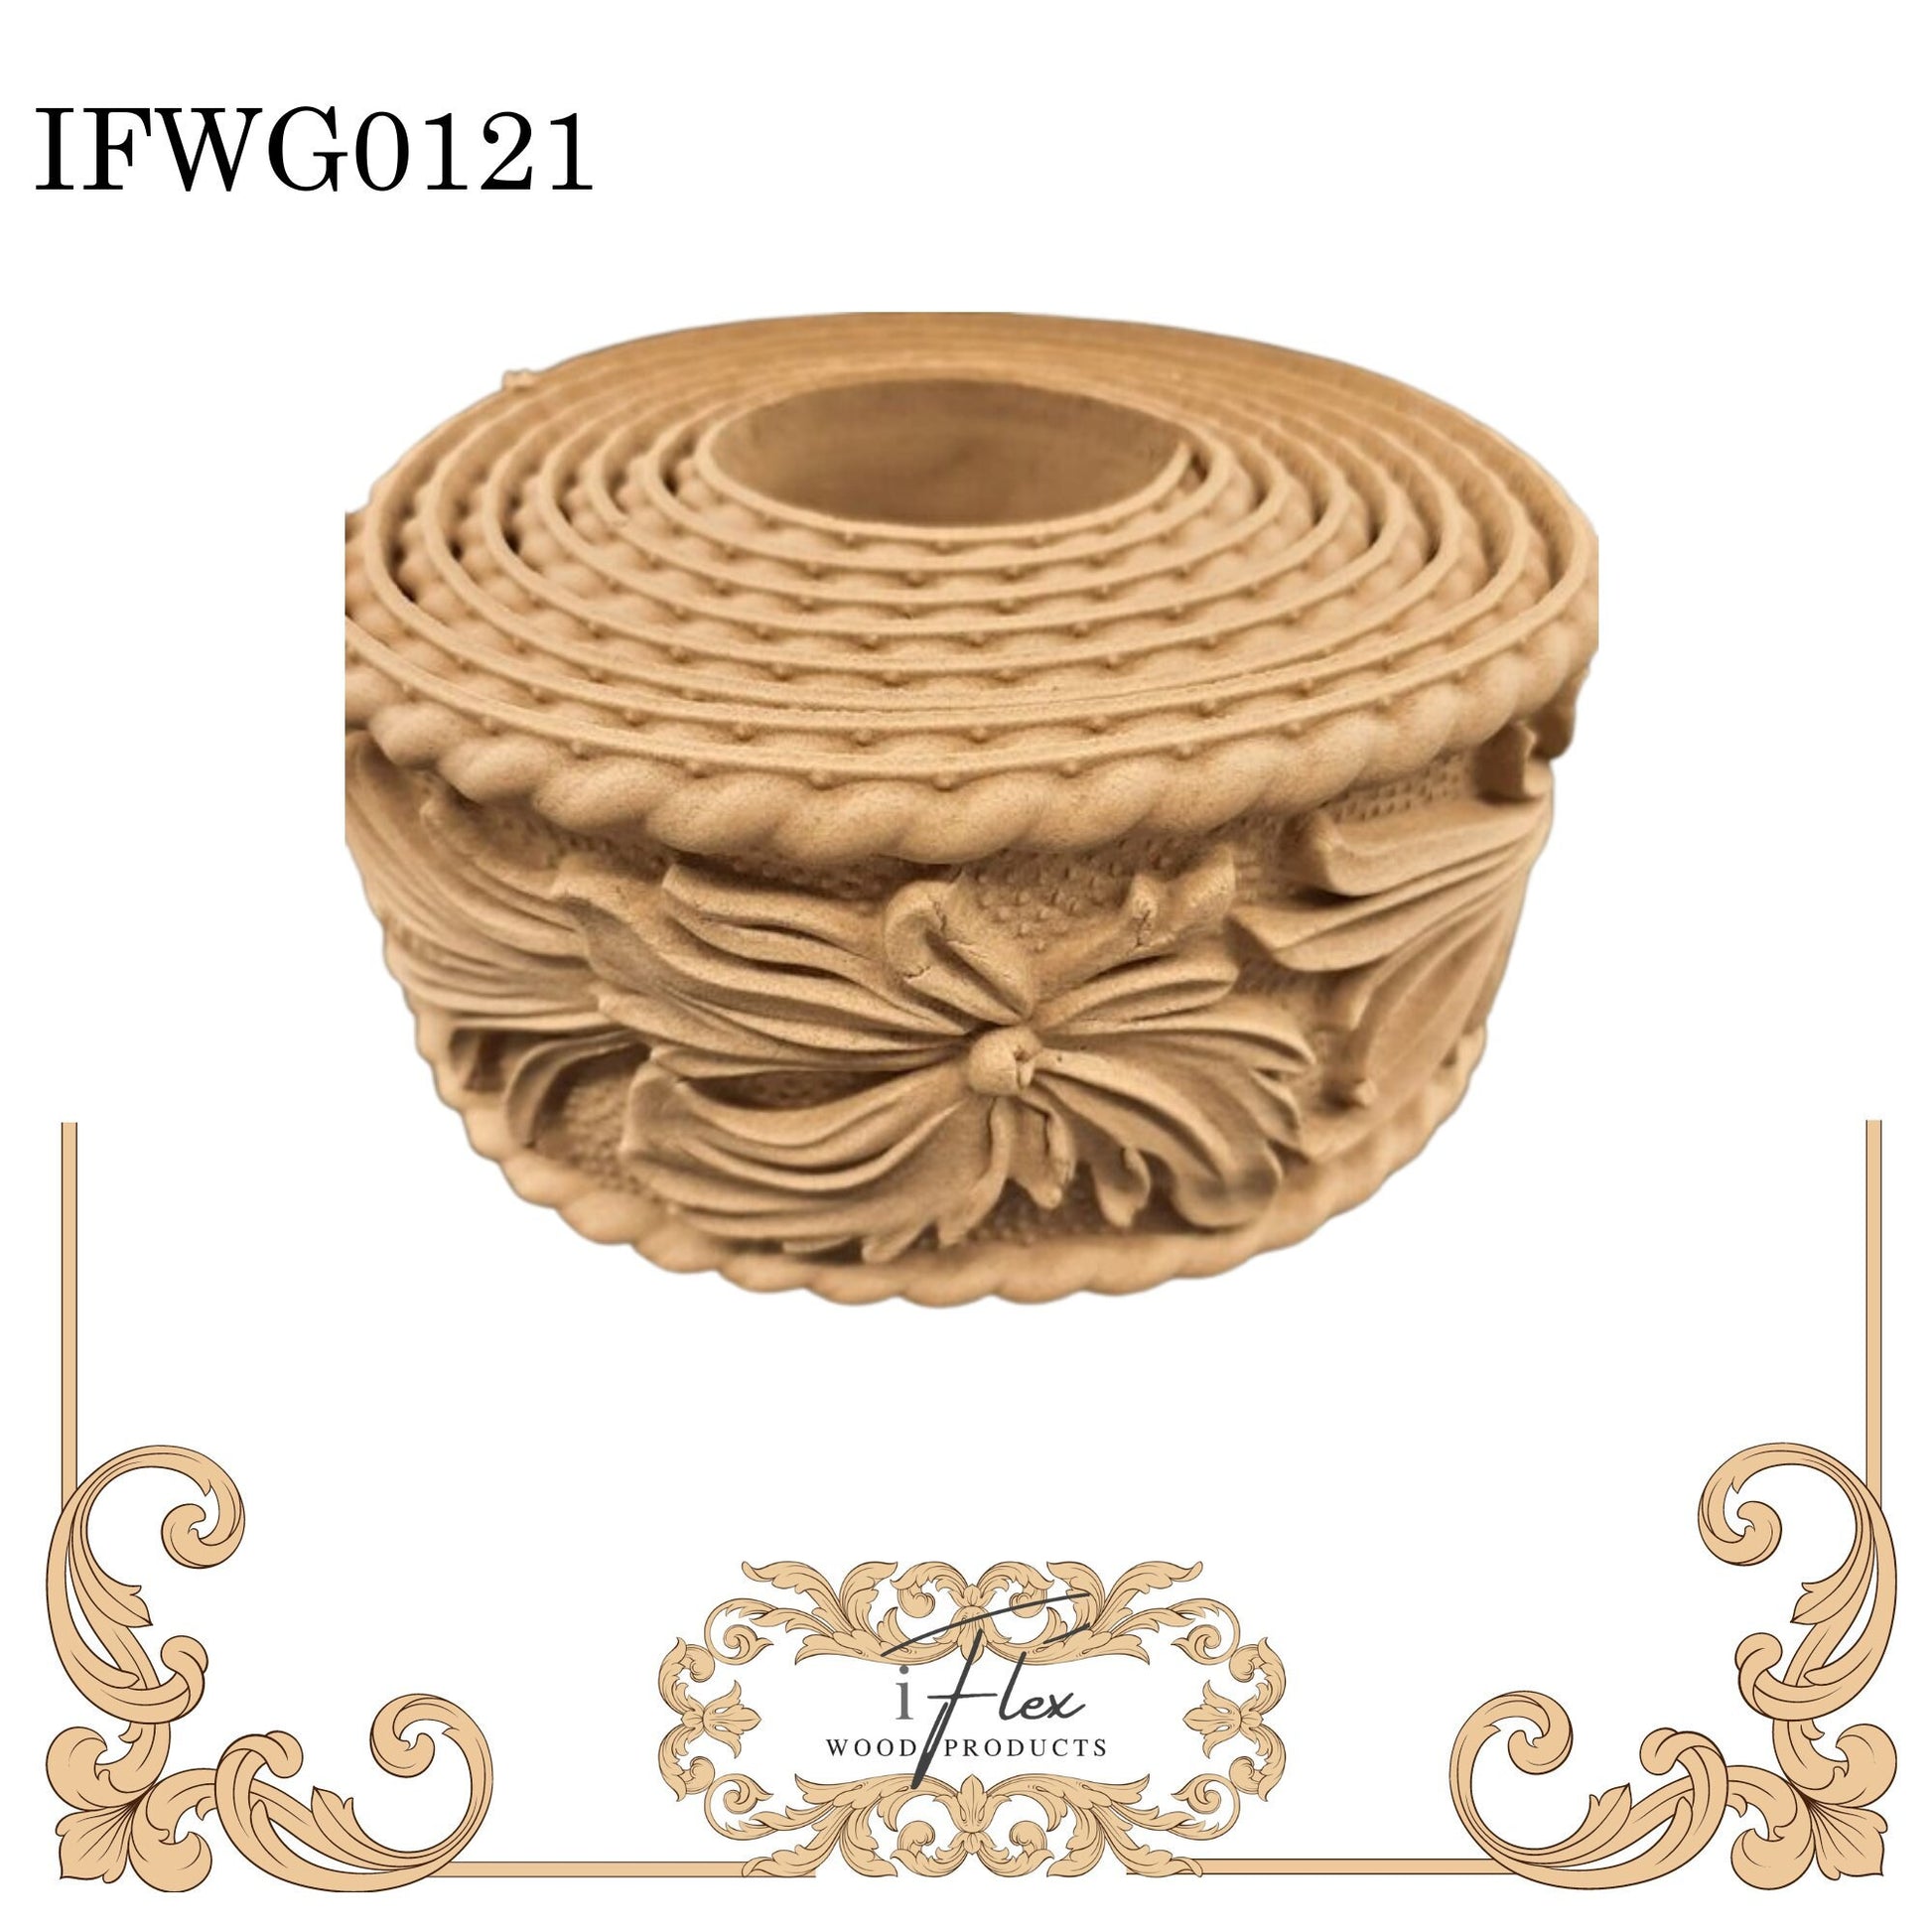 Large trim with flowers and scrolls IFW G0121 iFlex Wood Products, bendable mouldings, flexible, wooden appliques, trim, customer favorite